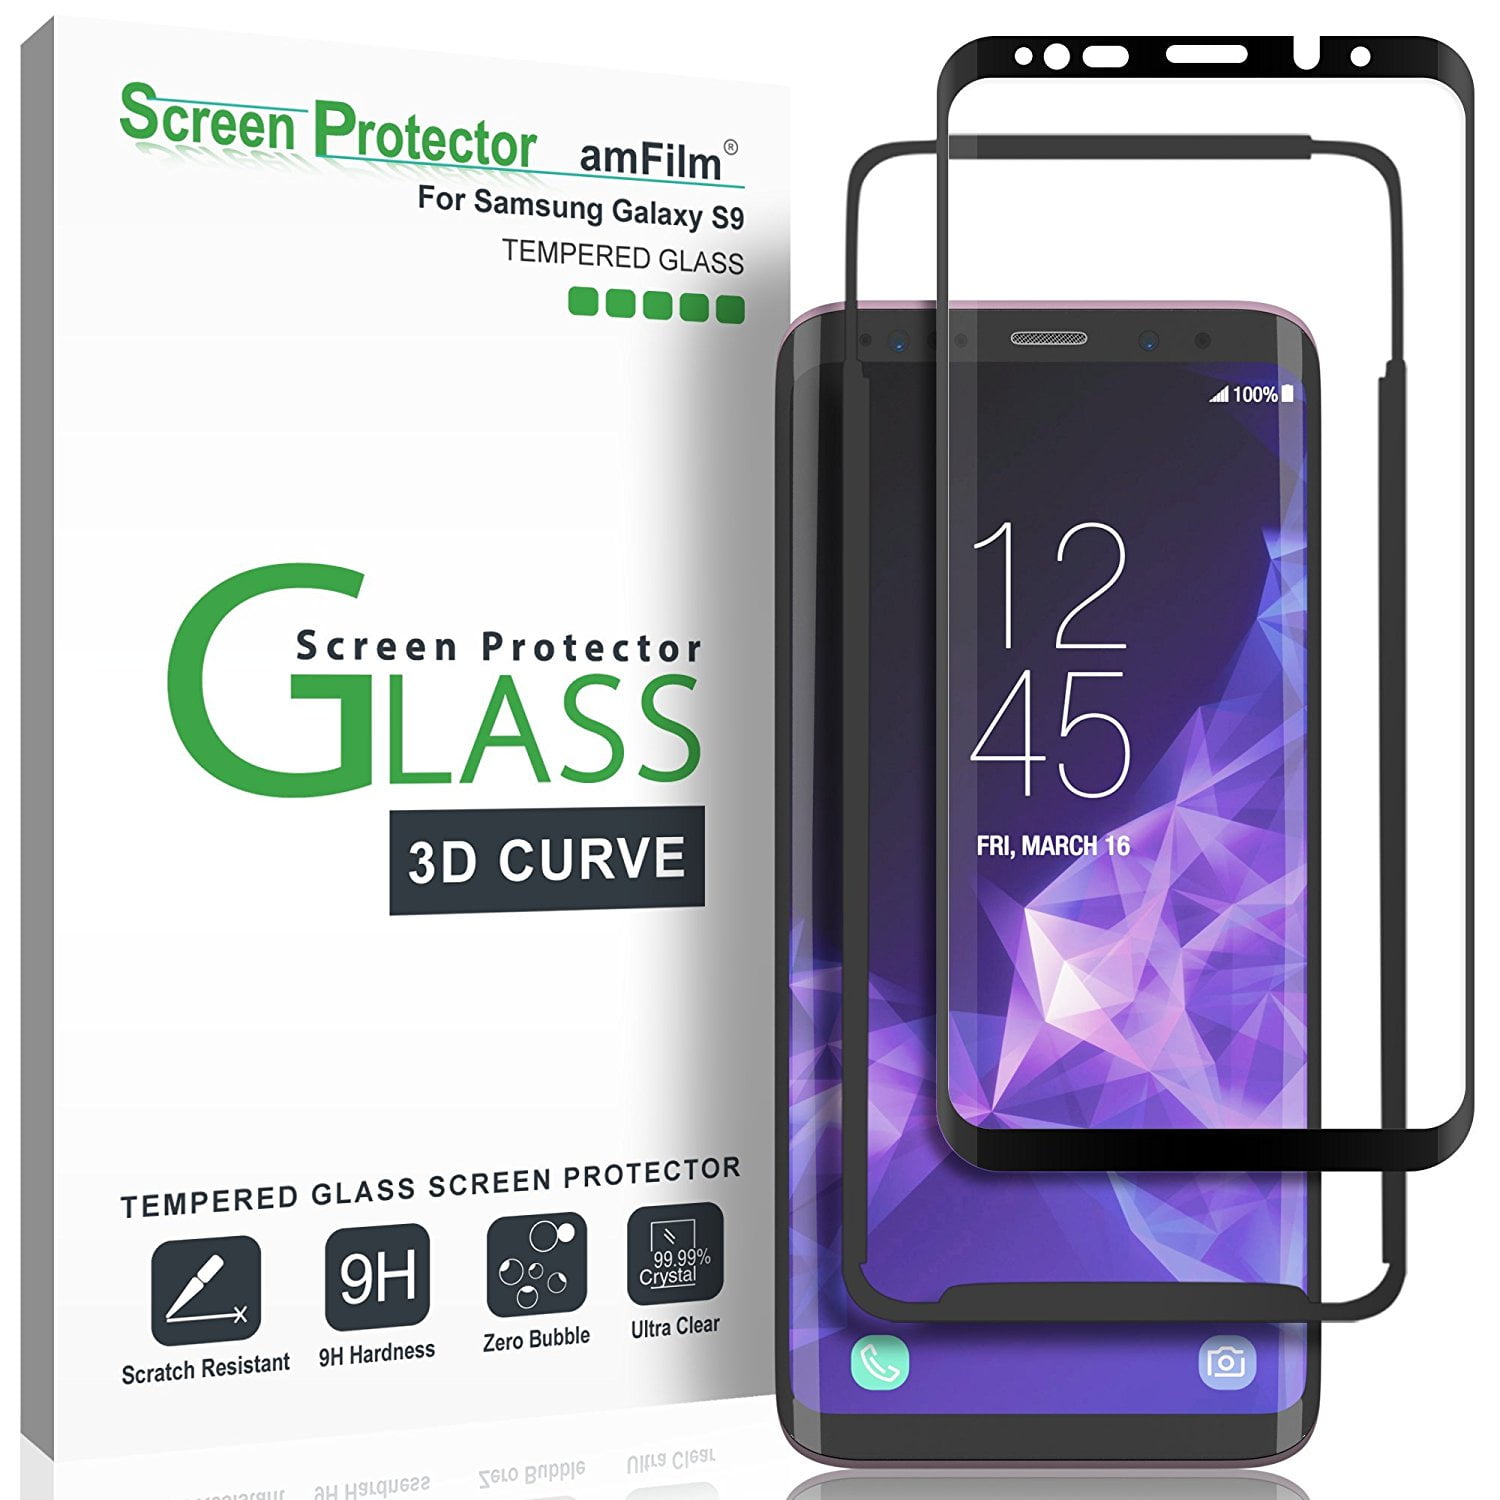 The Grafu Abrasion Resistance Anti Scratch 9H Hardness Screen Protector for Samsung Galaxy J7 2016 Galaxy J7 2016 Screen Protector Tempered Glass 1 Pack 